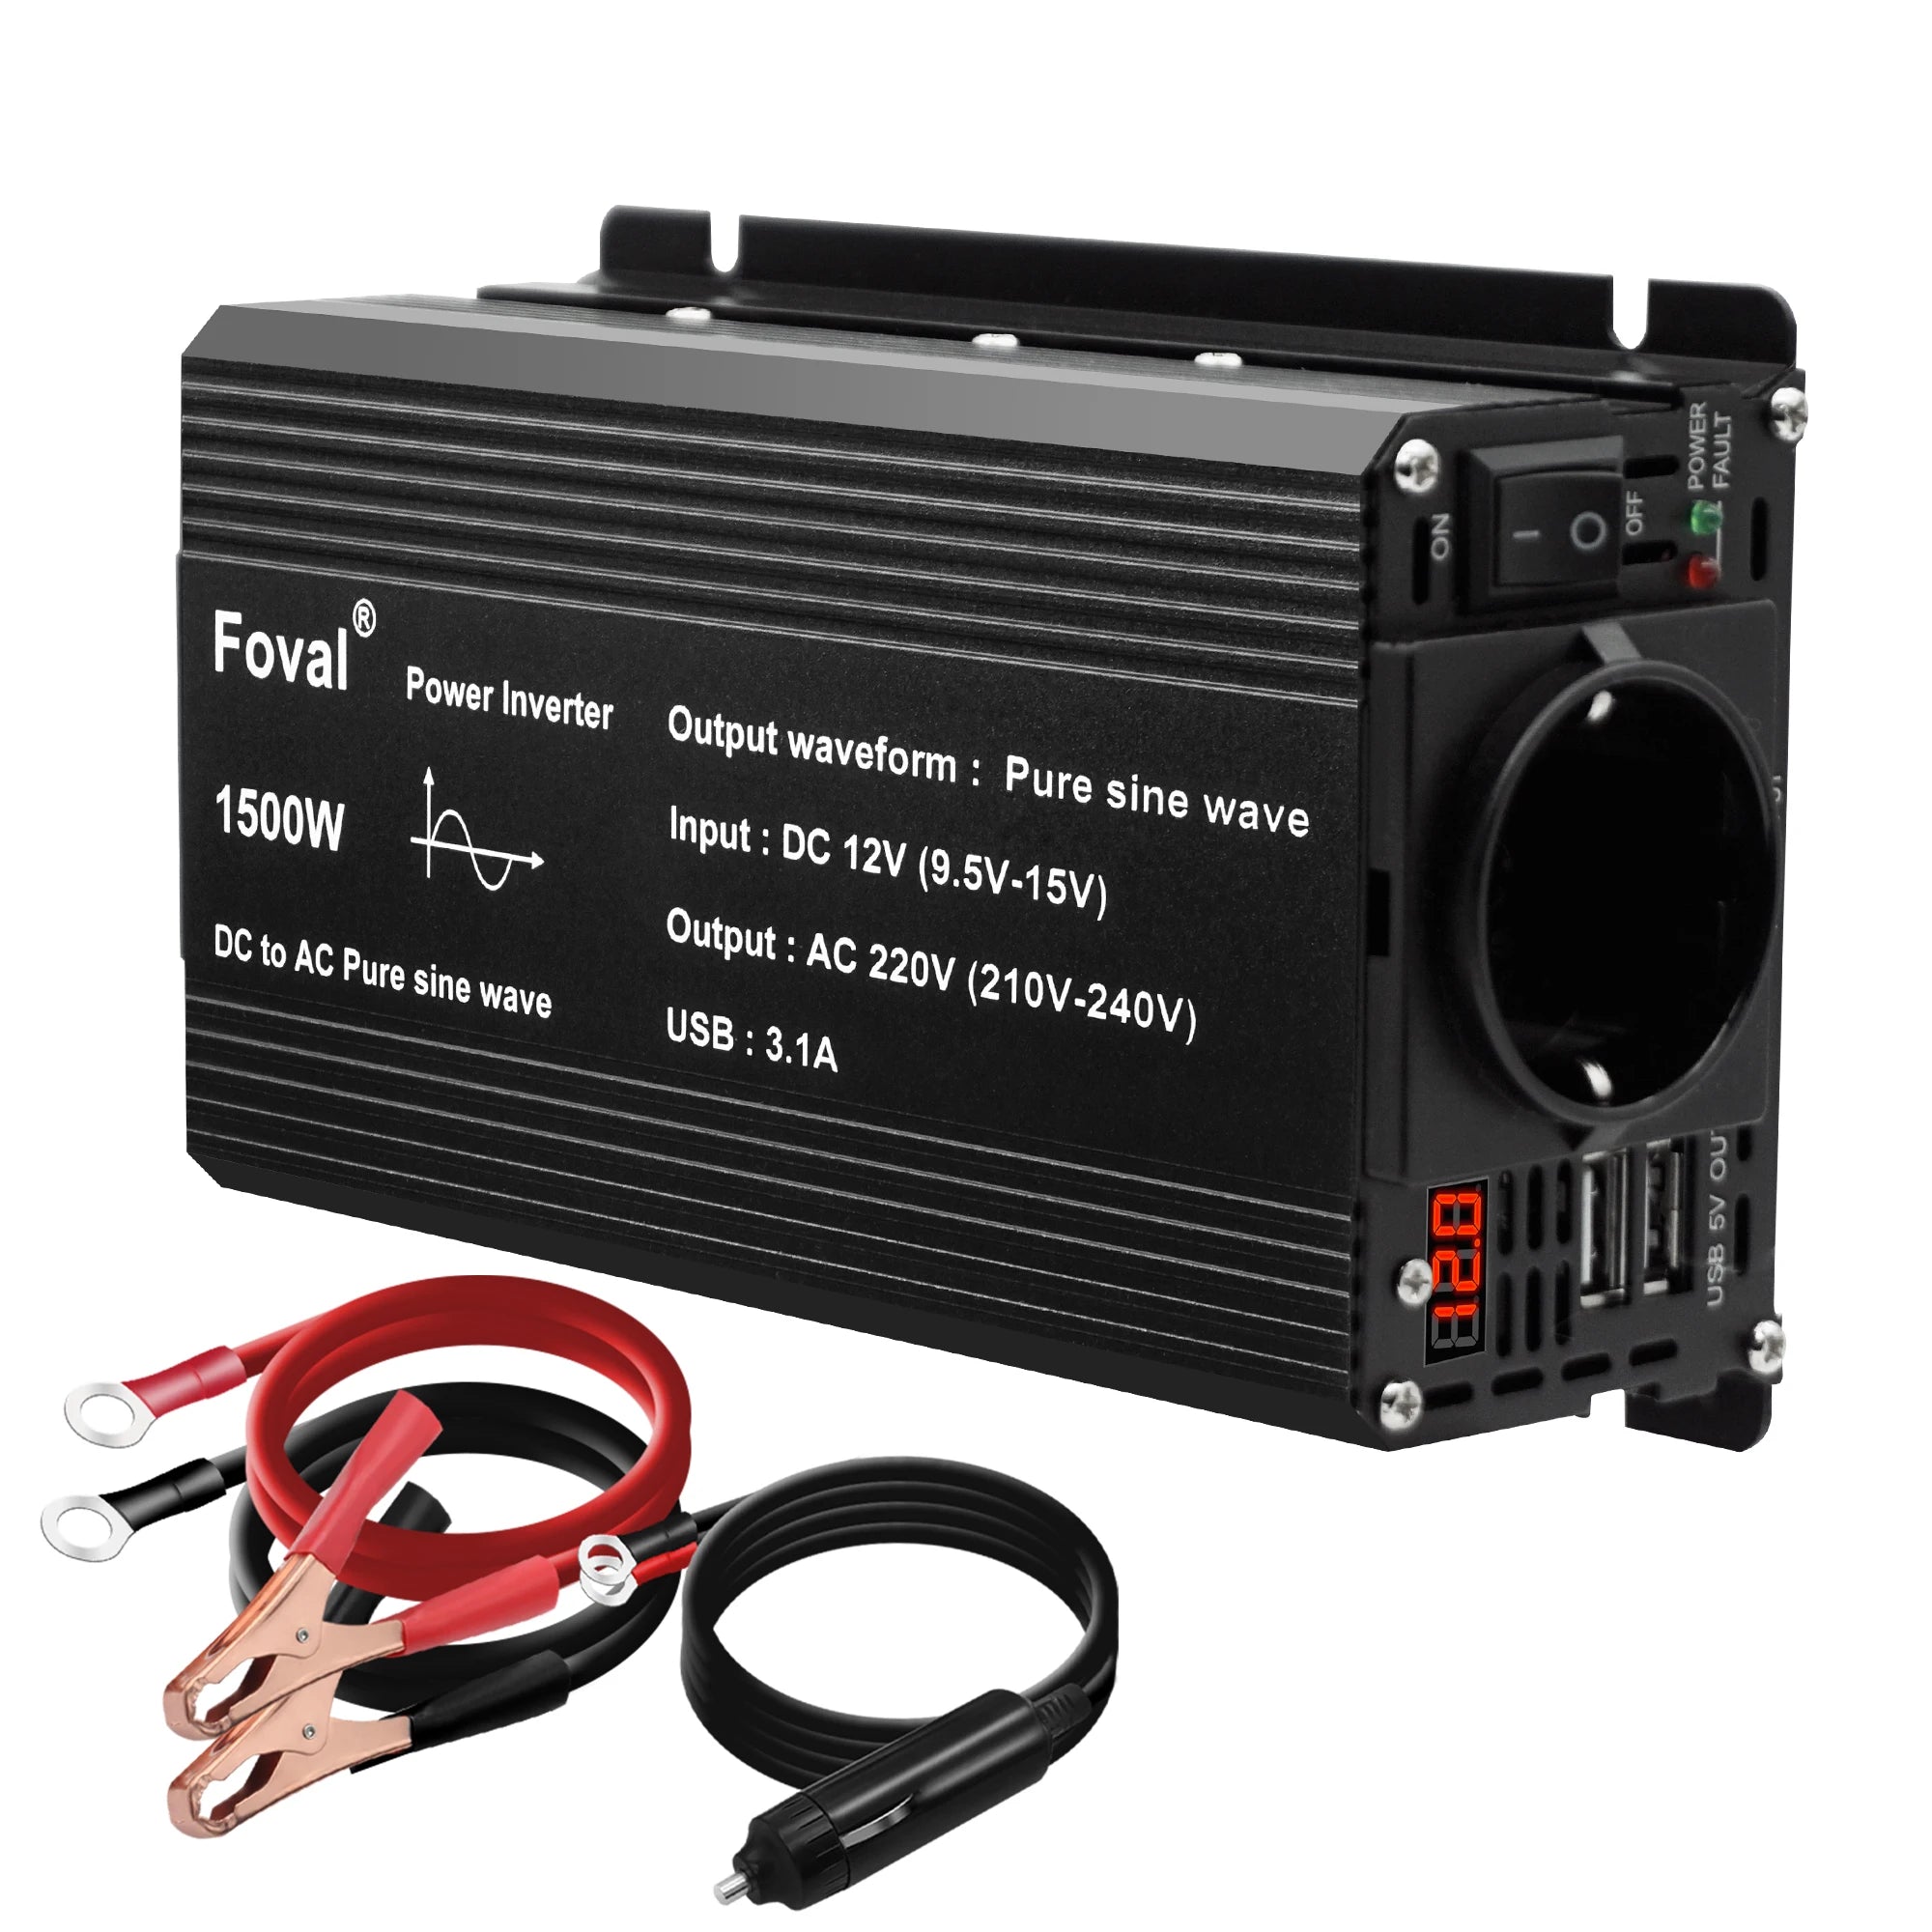 DC 12V to AC 220V Pure Sine Wave Inverter, Foval DC/AC Inverter: pure sine wave, 1-200kW power, 50Hz frequency, CE certified, with USB and various package sizes.